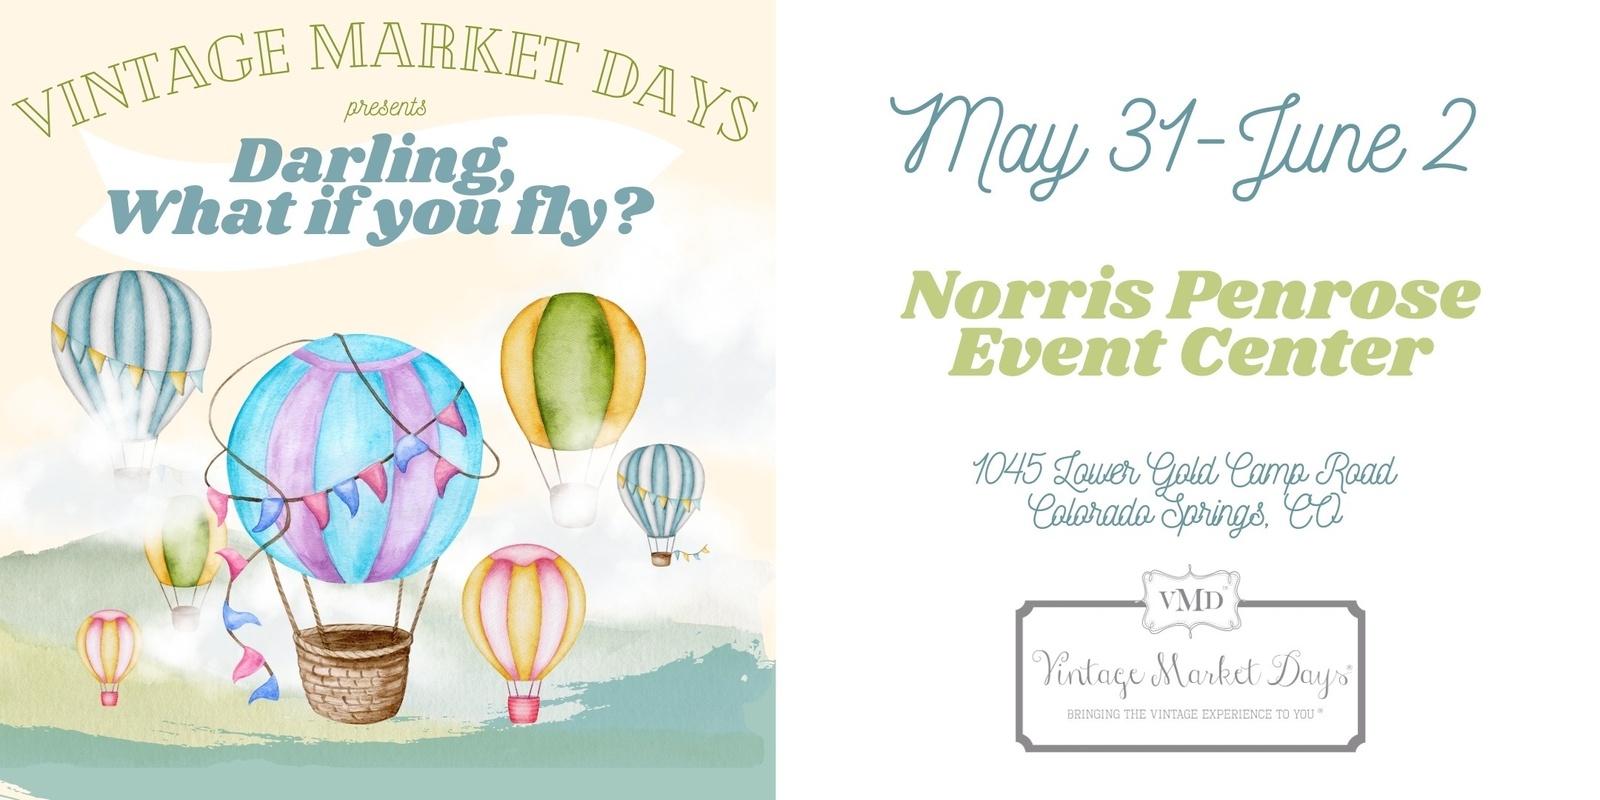 Banner image for Vintage Market Days® Colorado Springs - "Darling, What if you fly?"